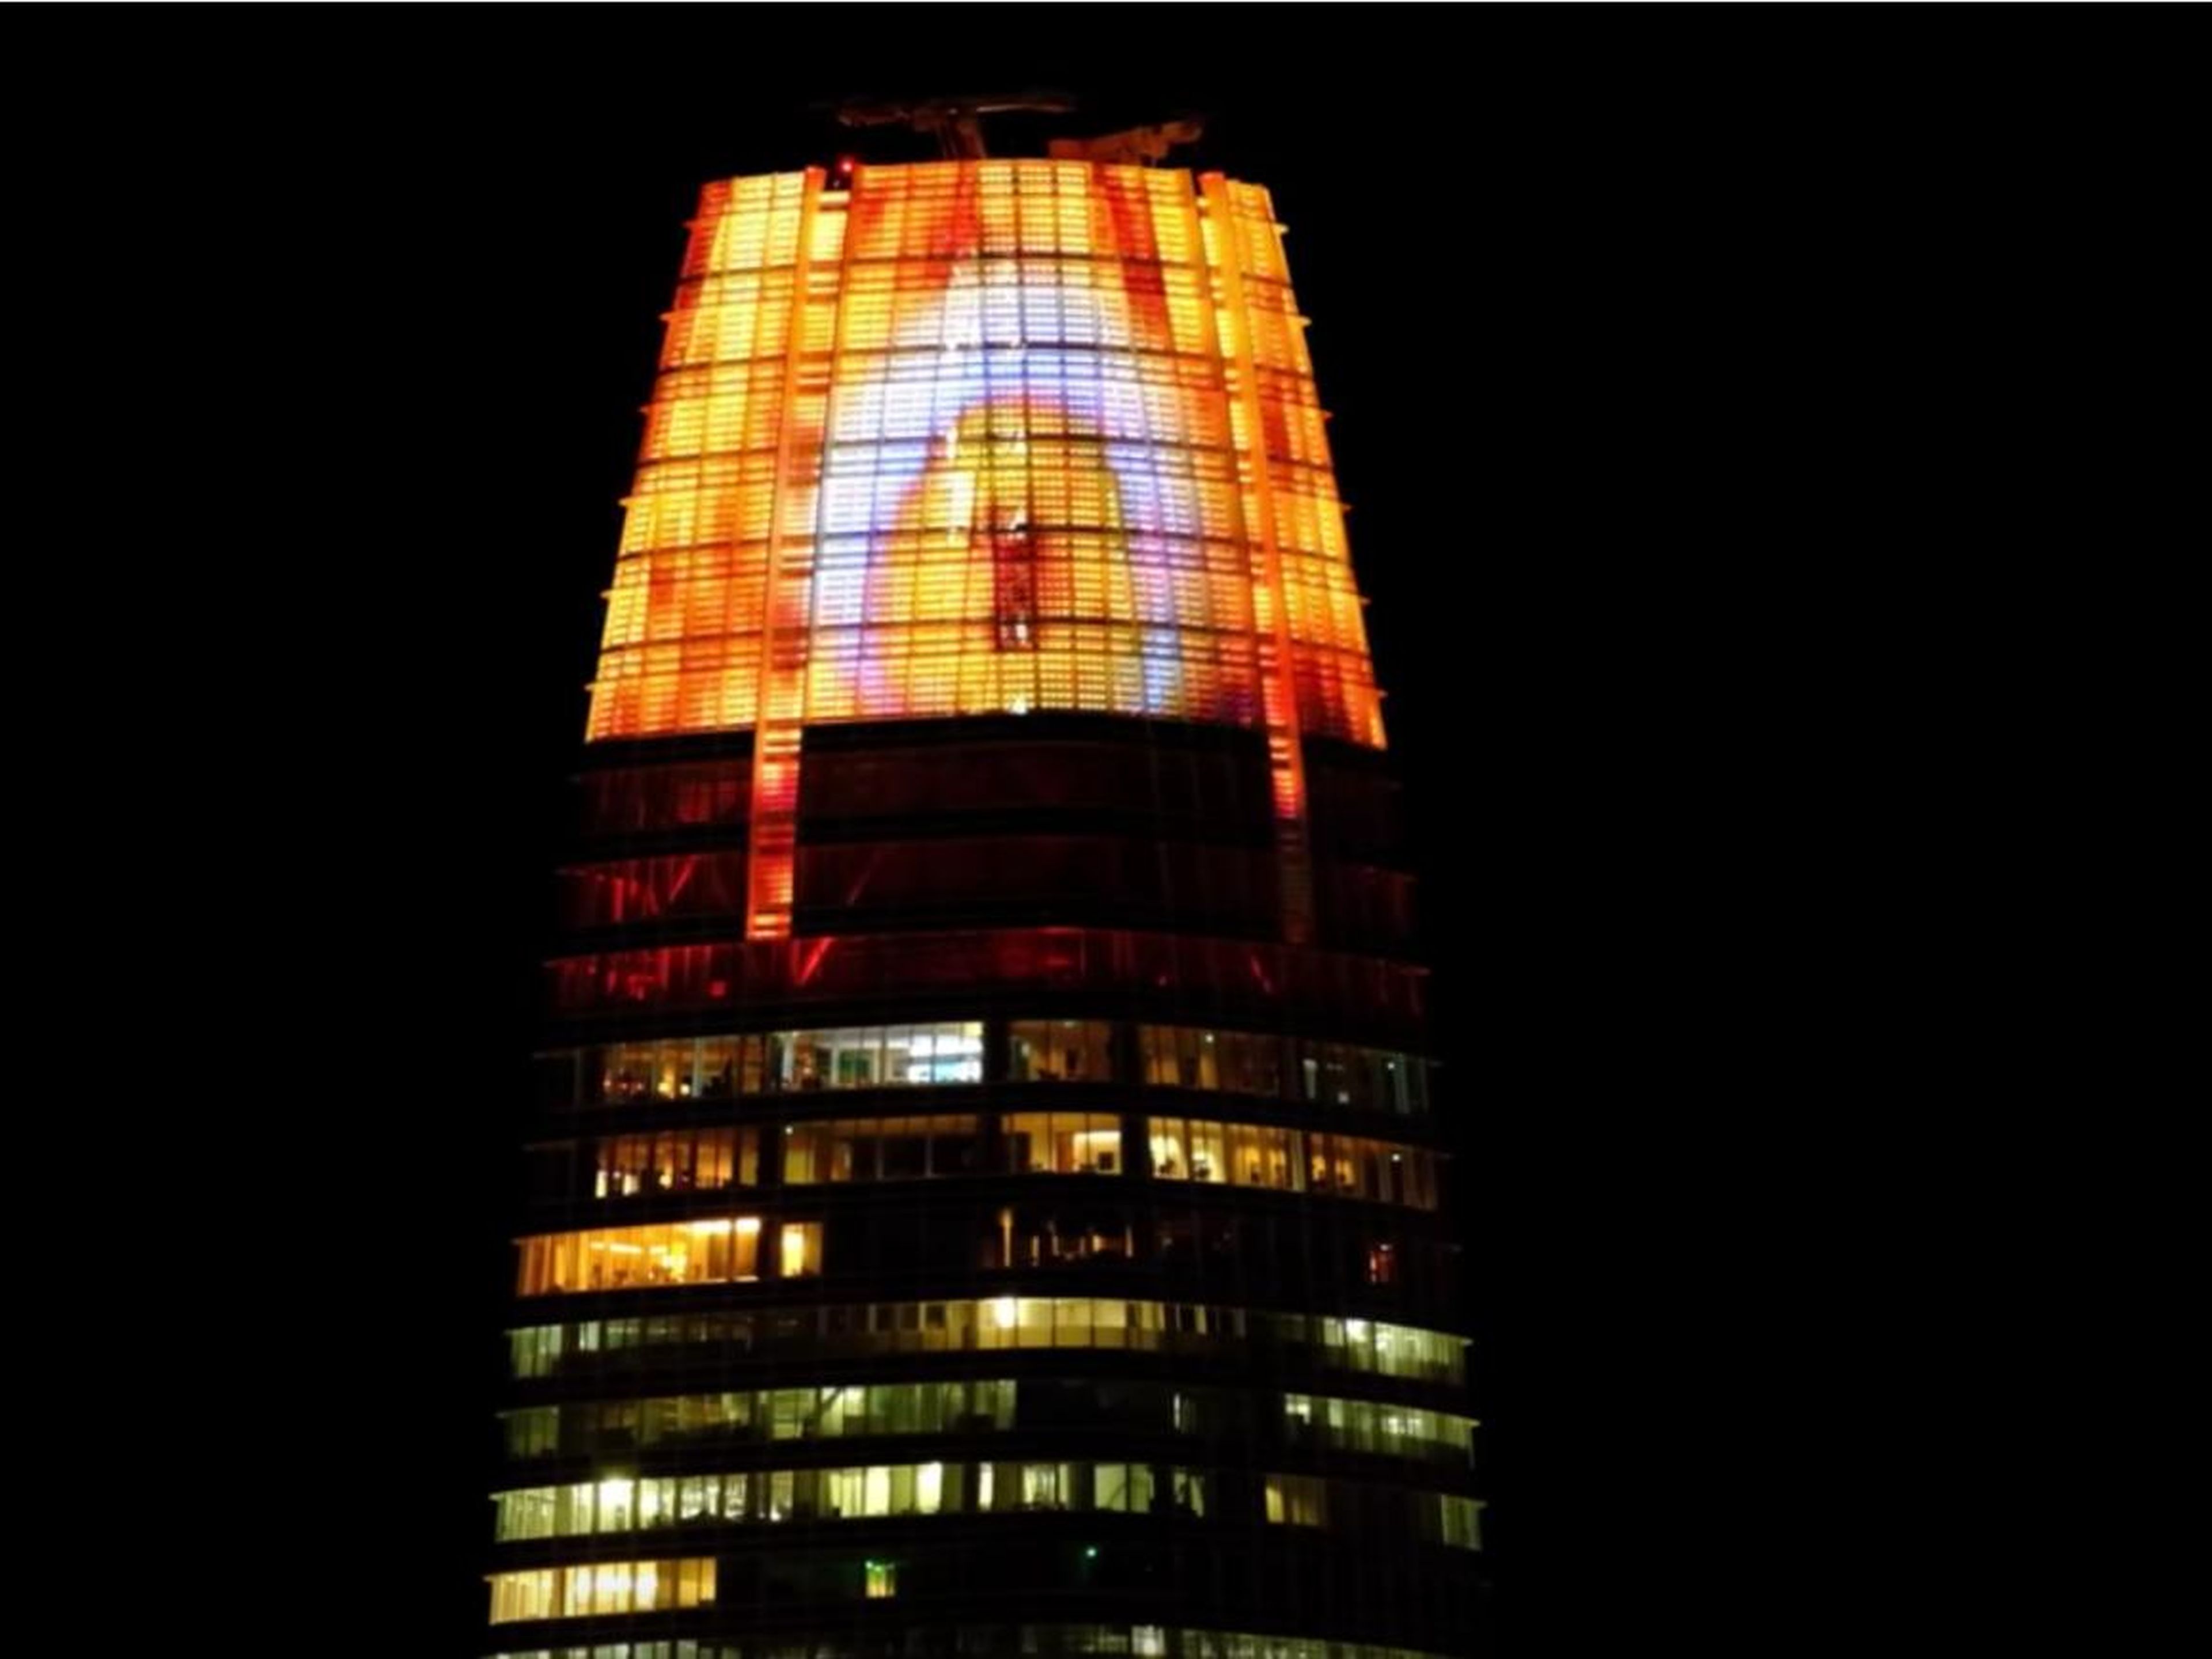 NOVEMBER: Not helping the tech industry's growing reputation for doing evil, the Salesforce Tower was lit up like the Eye of Sauron from "The Lord of the Rings."